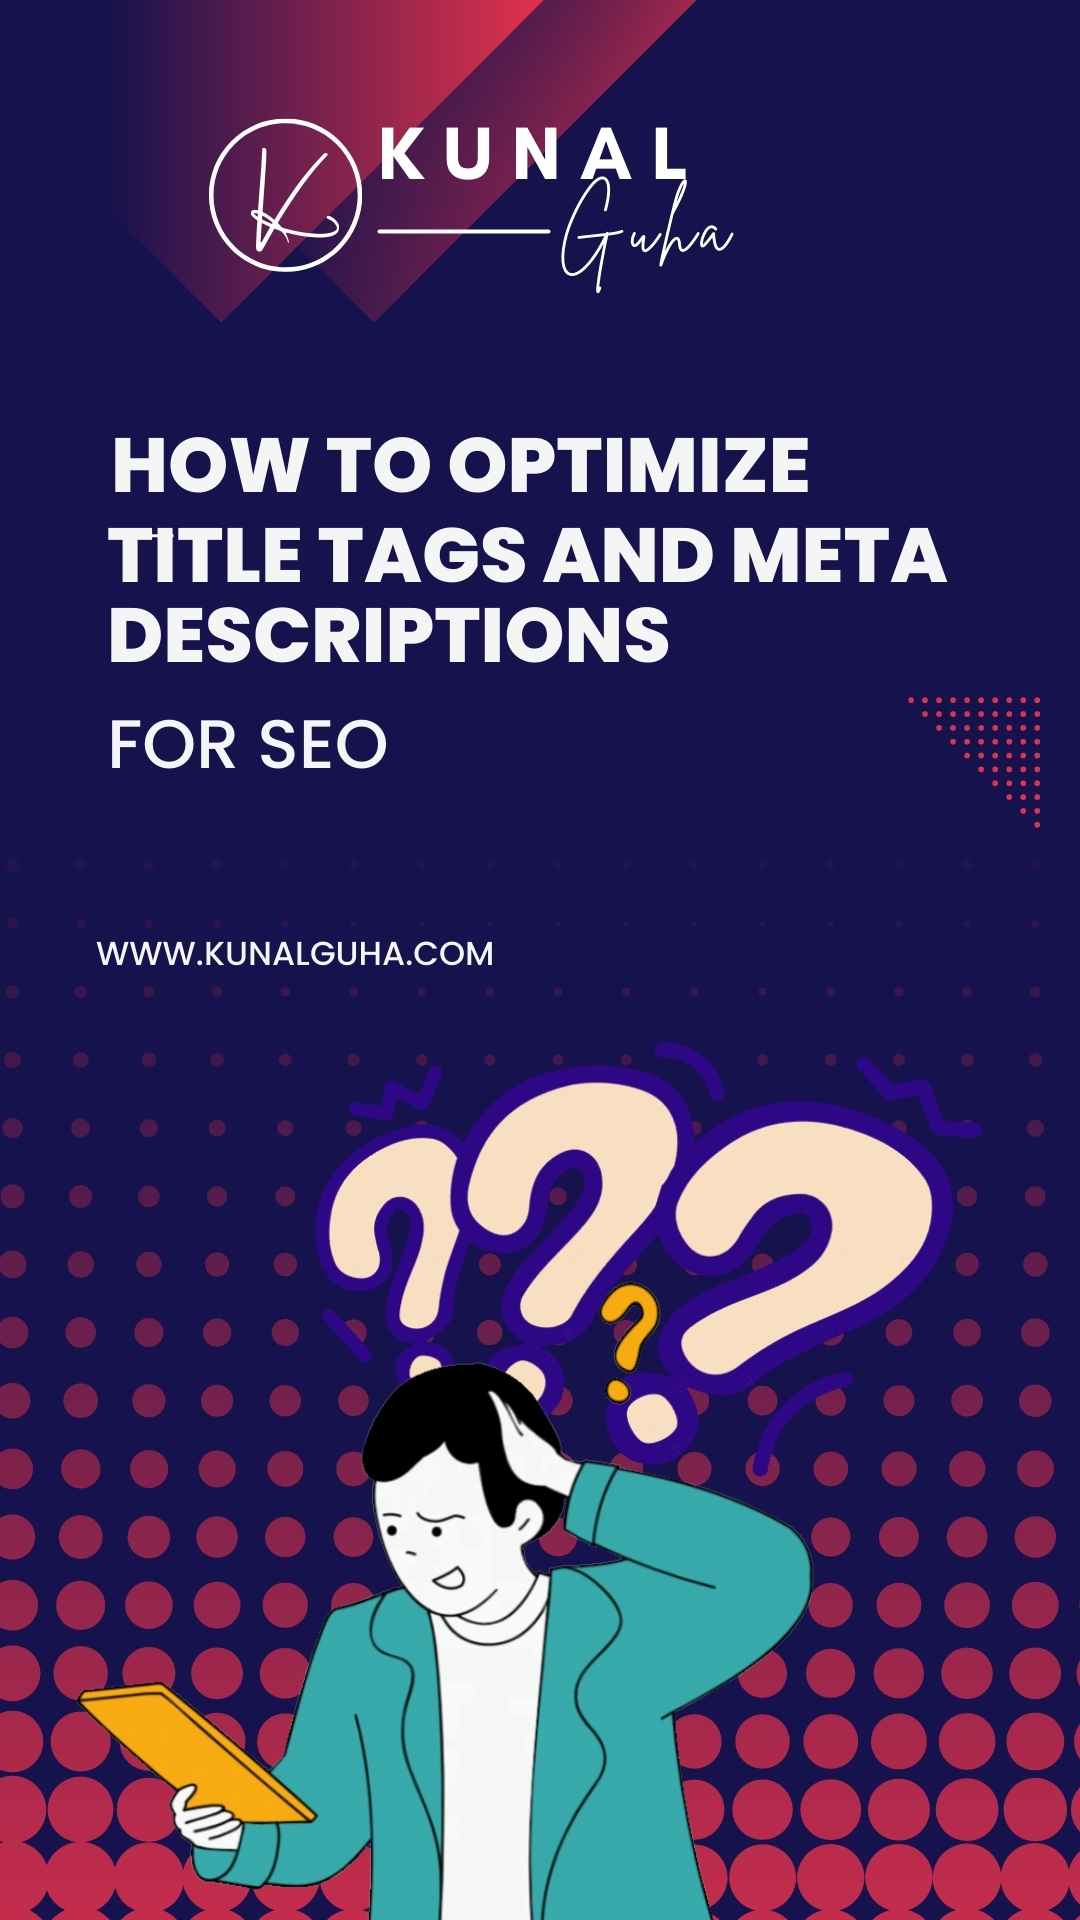 Optimize Your Title Tags and Meta Descriptions for SEO